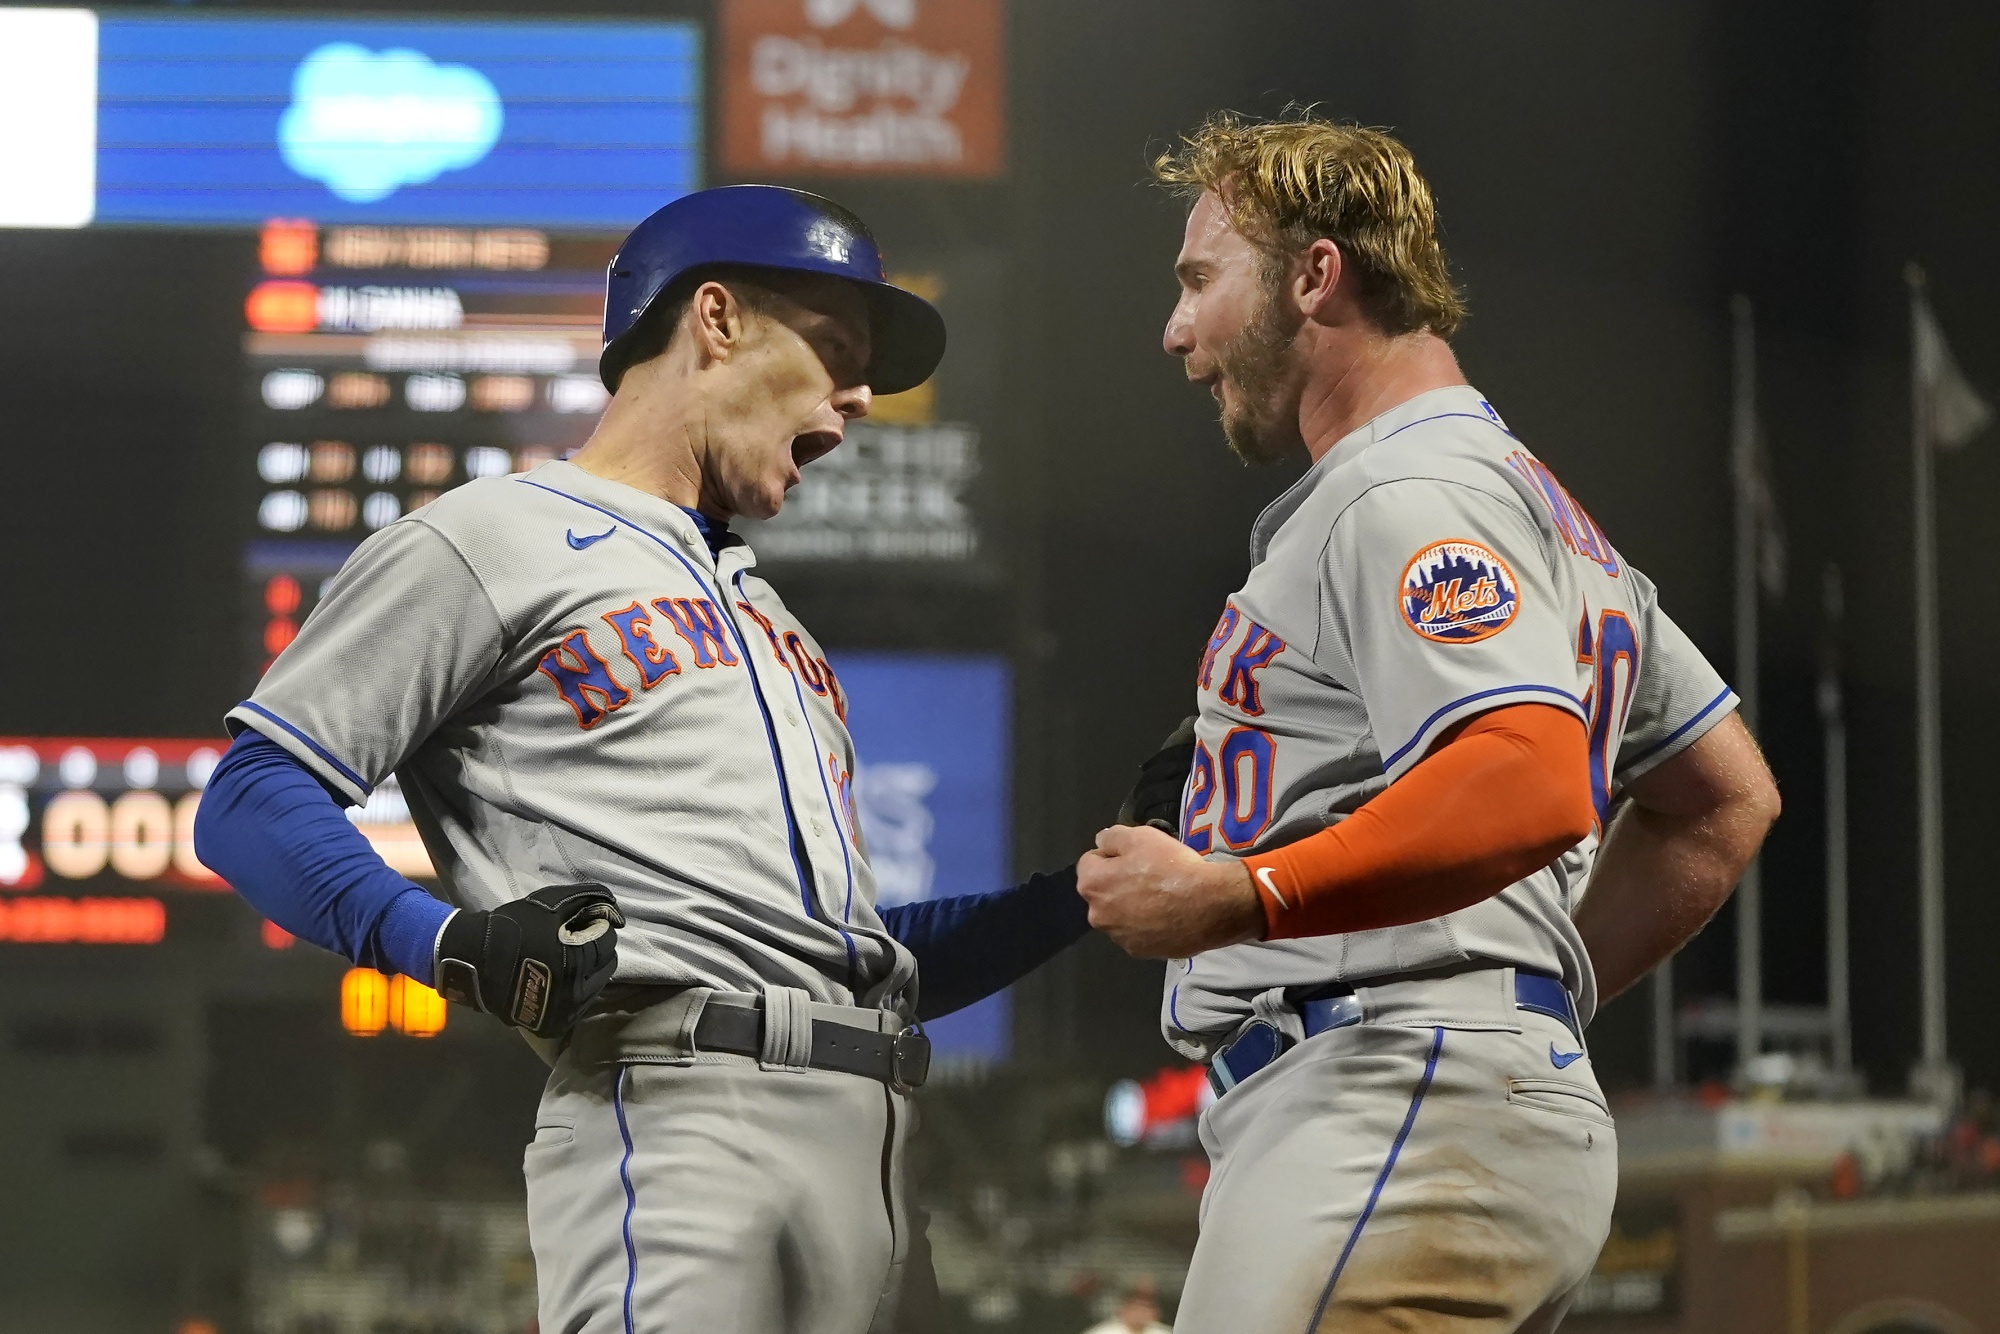 Mets Season Review: Pete Alonso was the Mets' most consistent